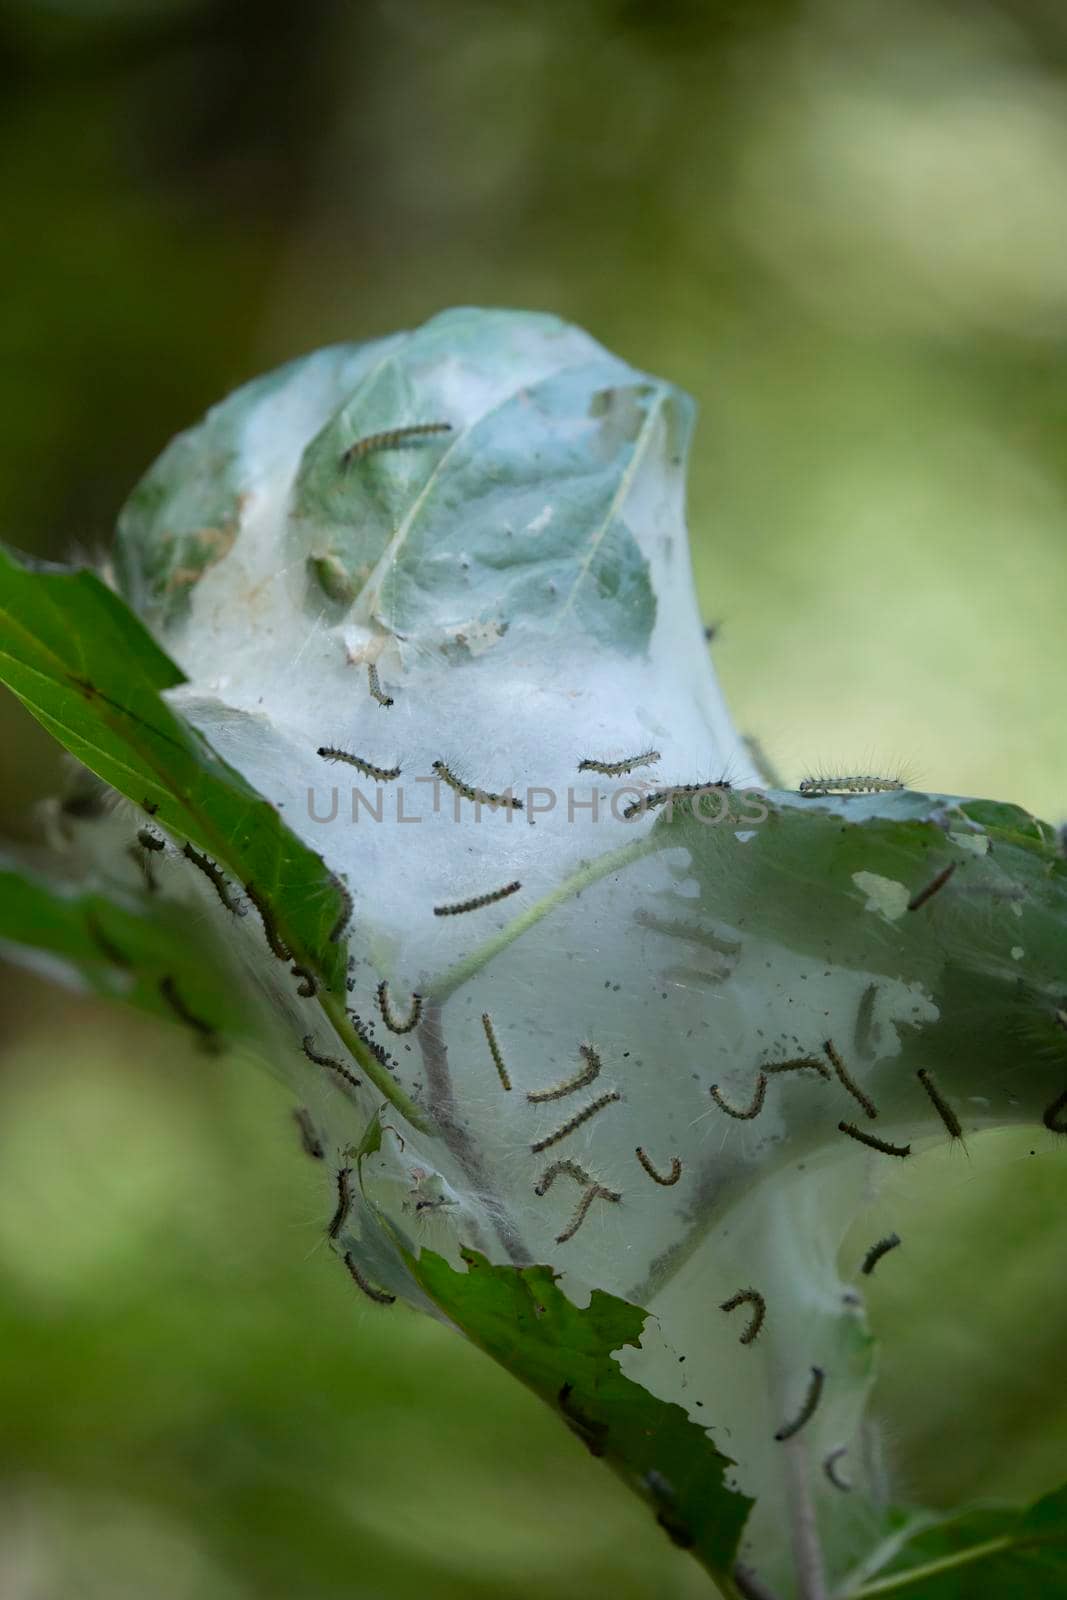 Caterpillars in a Cocoon by tornado98